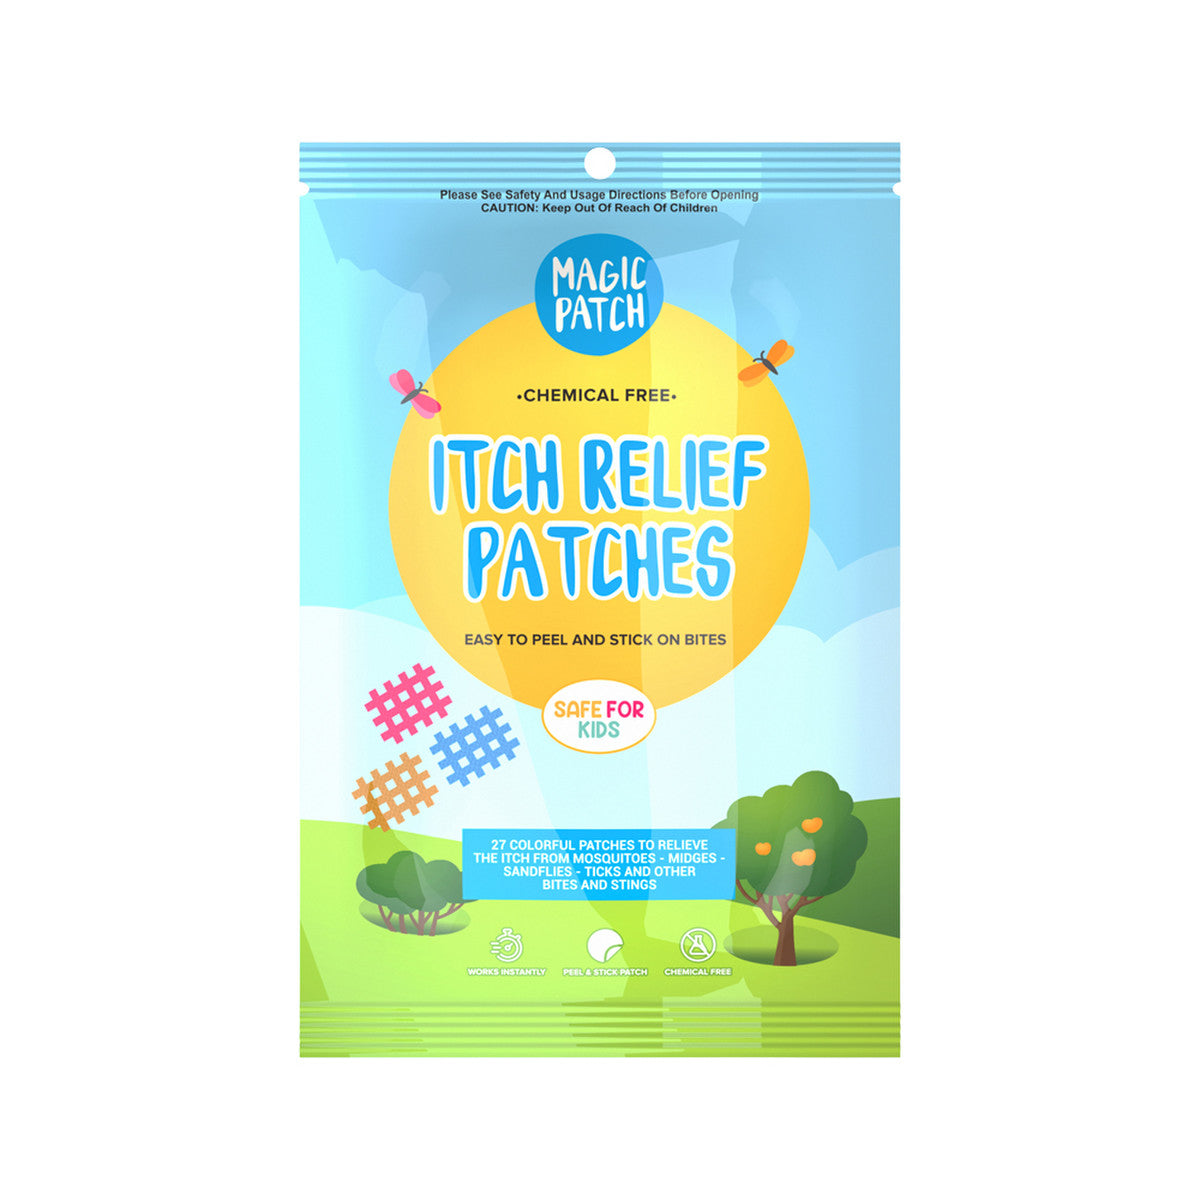 The Natural Patch Co. - Magic Patch Itch Relief Patches